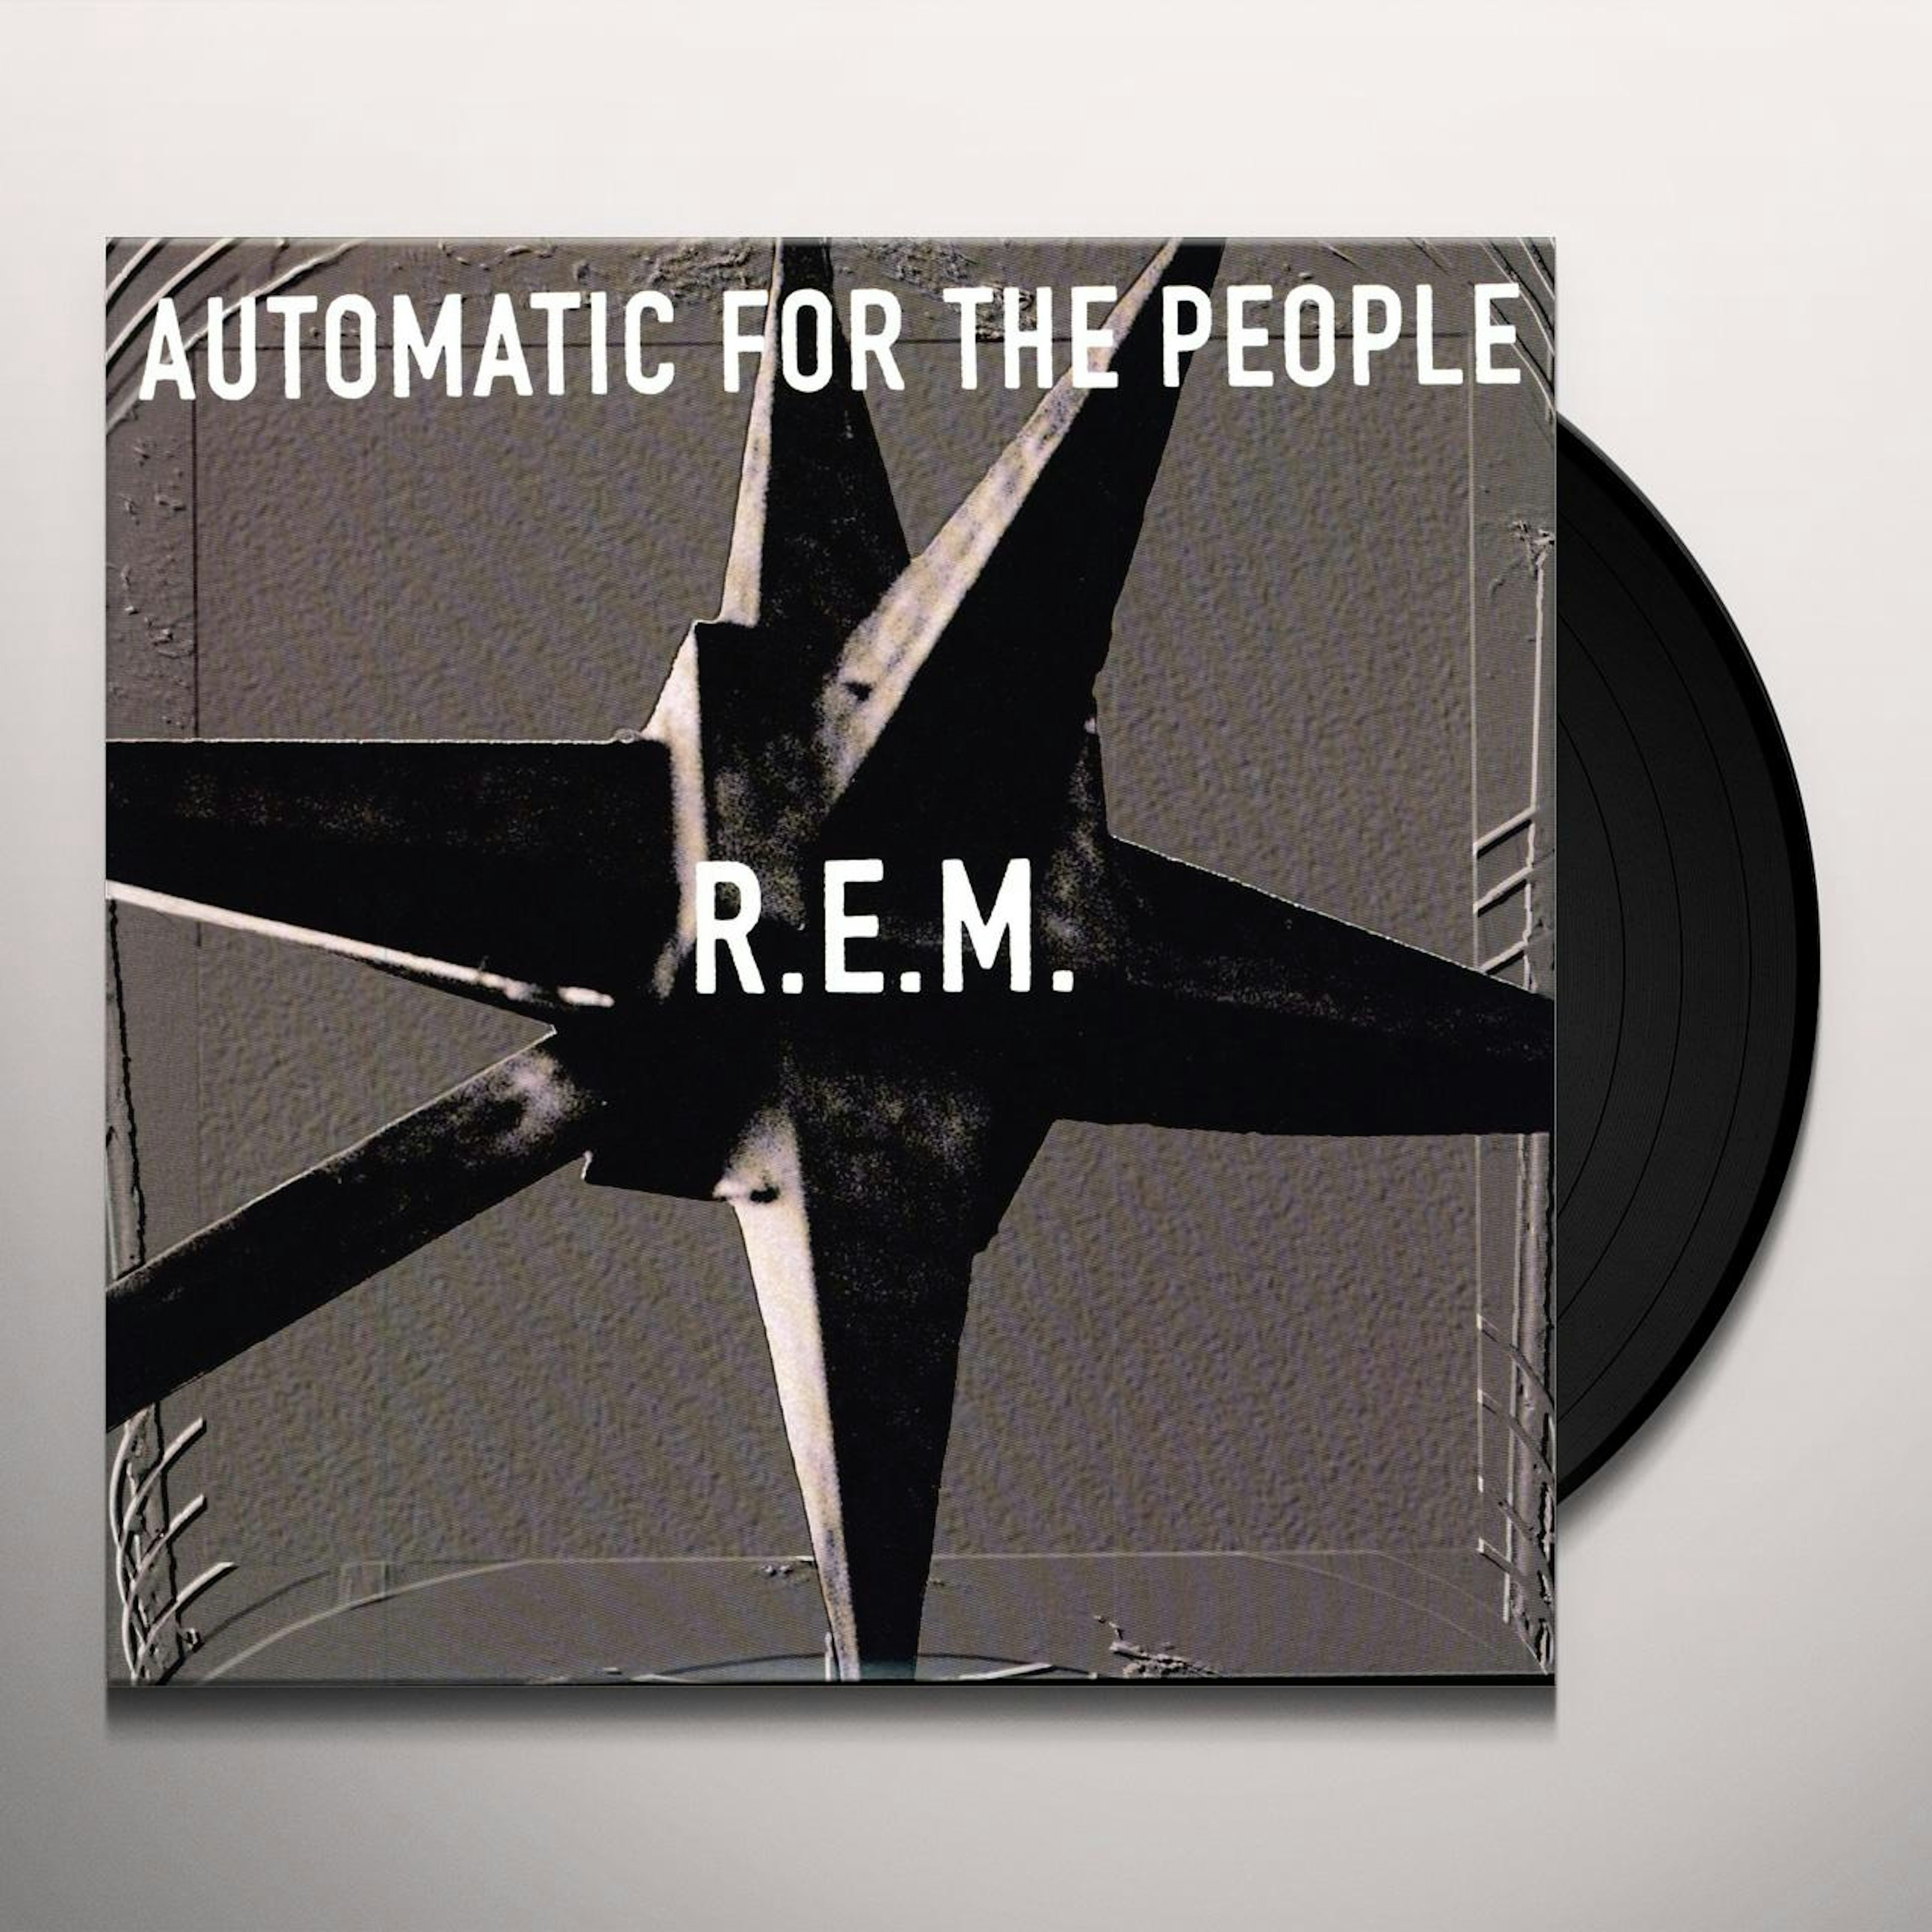 R.E.M. AUTOMATIC FOR THE Vinyl Record - UK Release